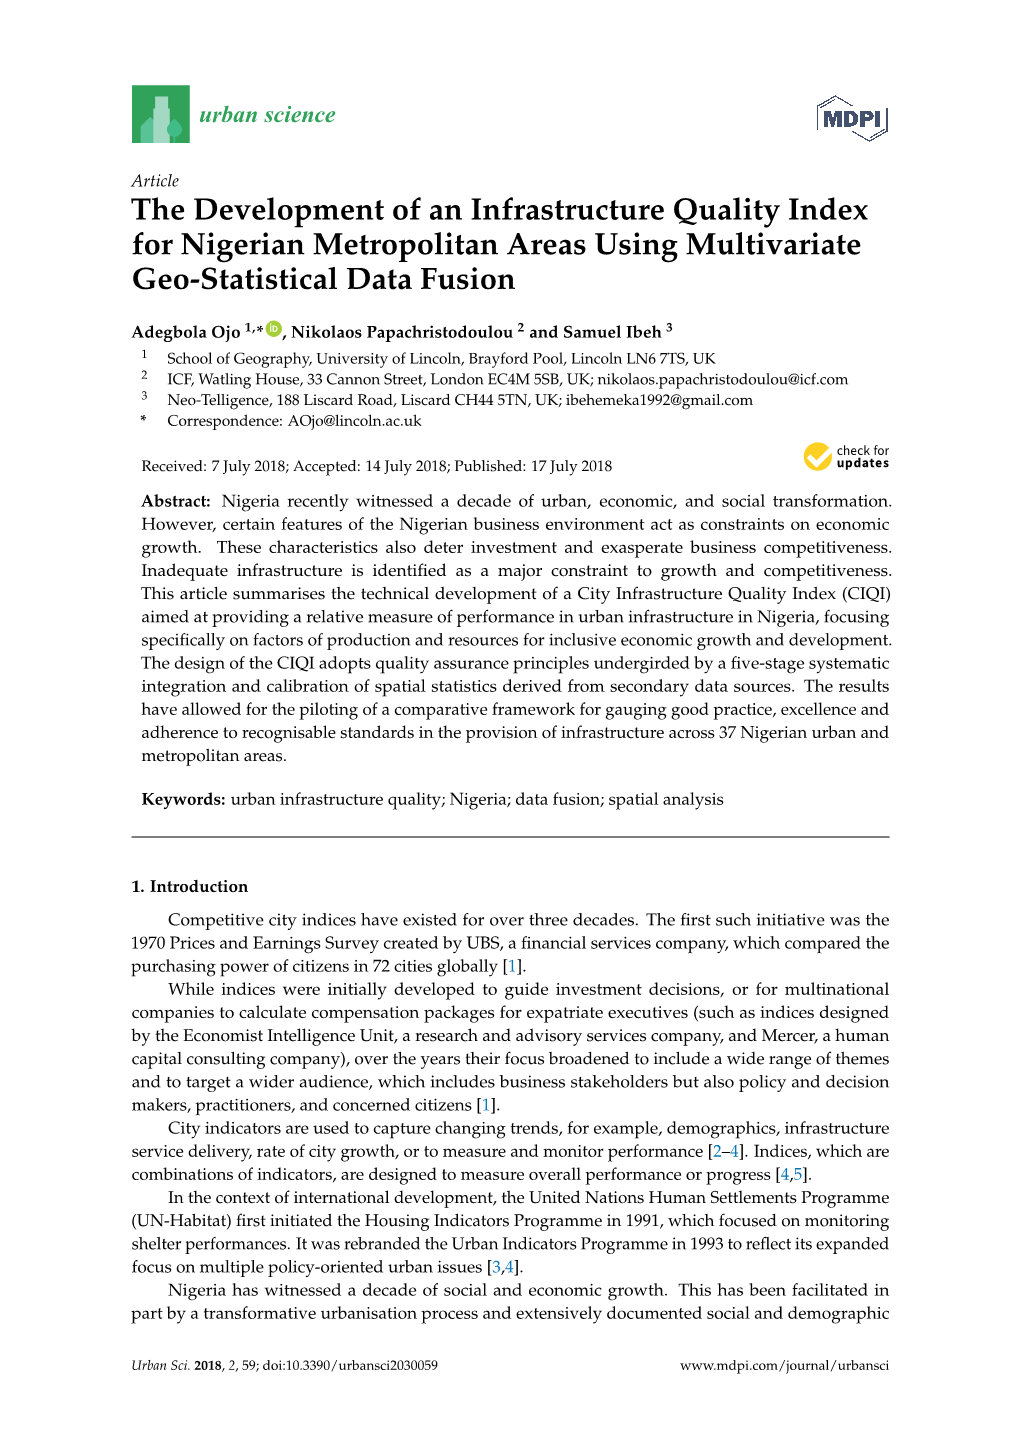 The Development of an Infrastructure Quality Index for Nigerian Metropolitan Areas Using Multivariate Geo-Statistical Data Fusion